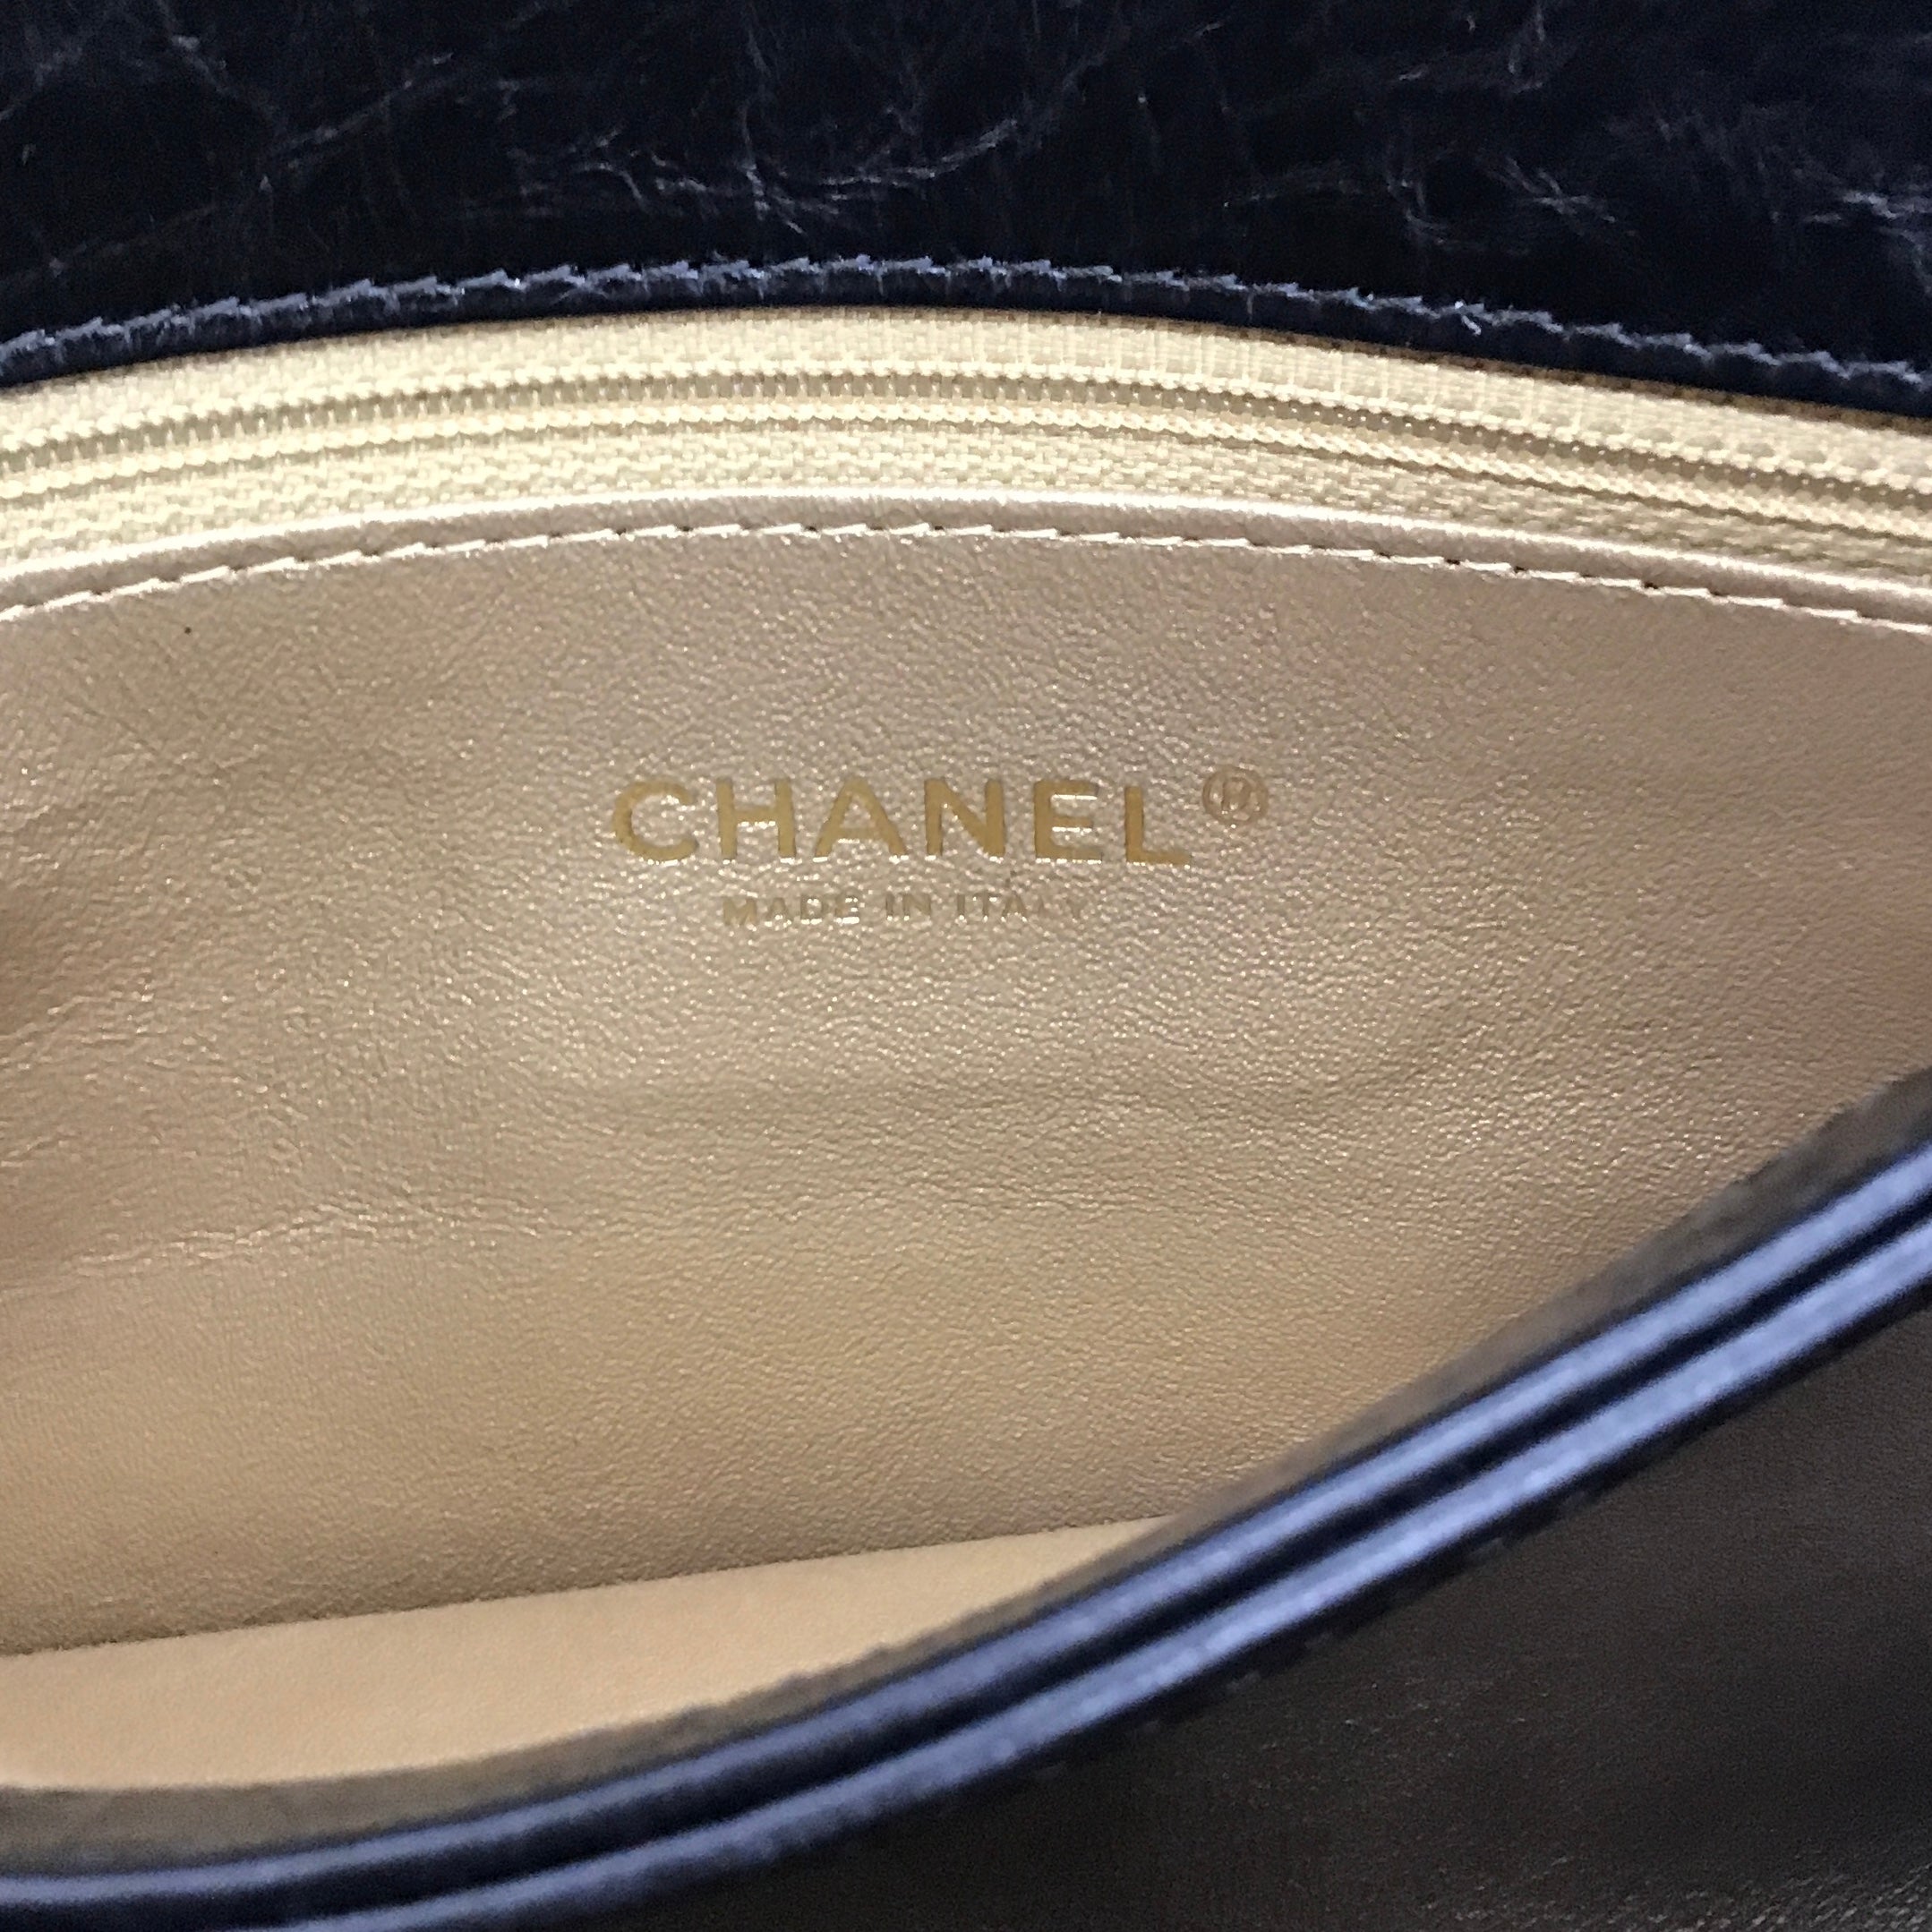 Chanel 2018 Black Leather Clutch with Gold Chain Detail